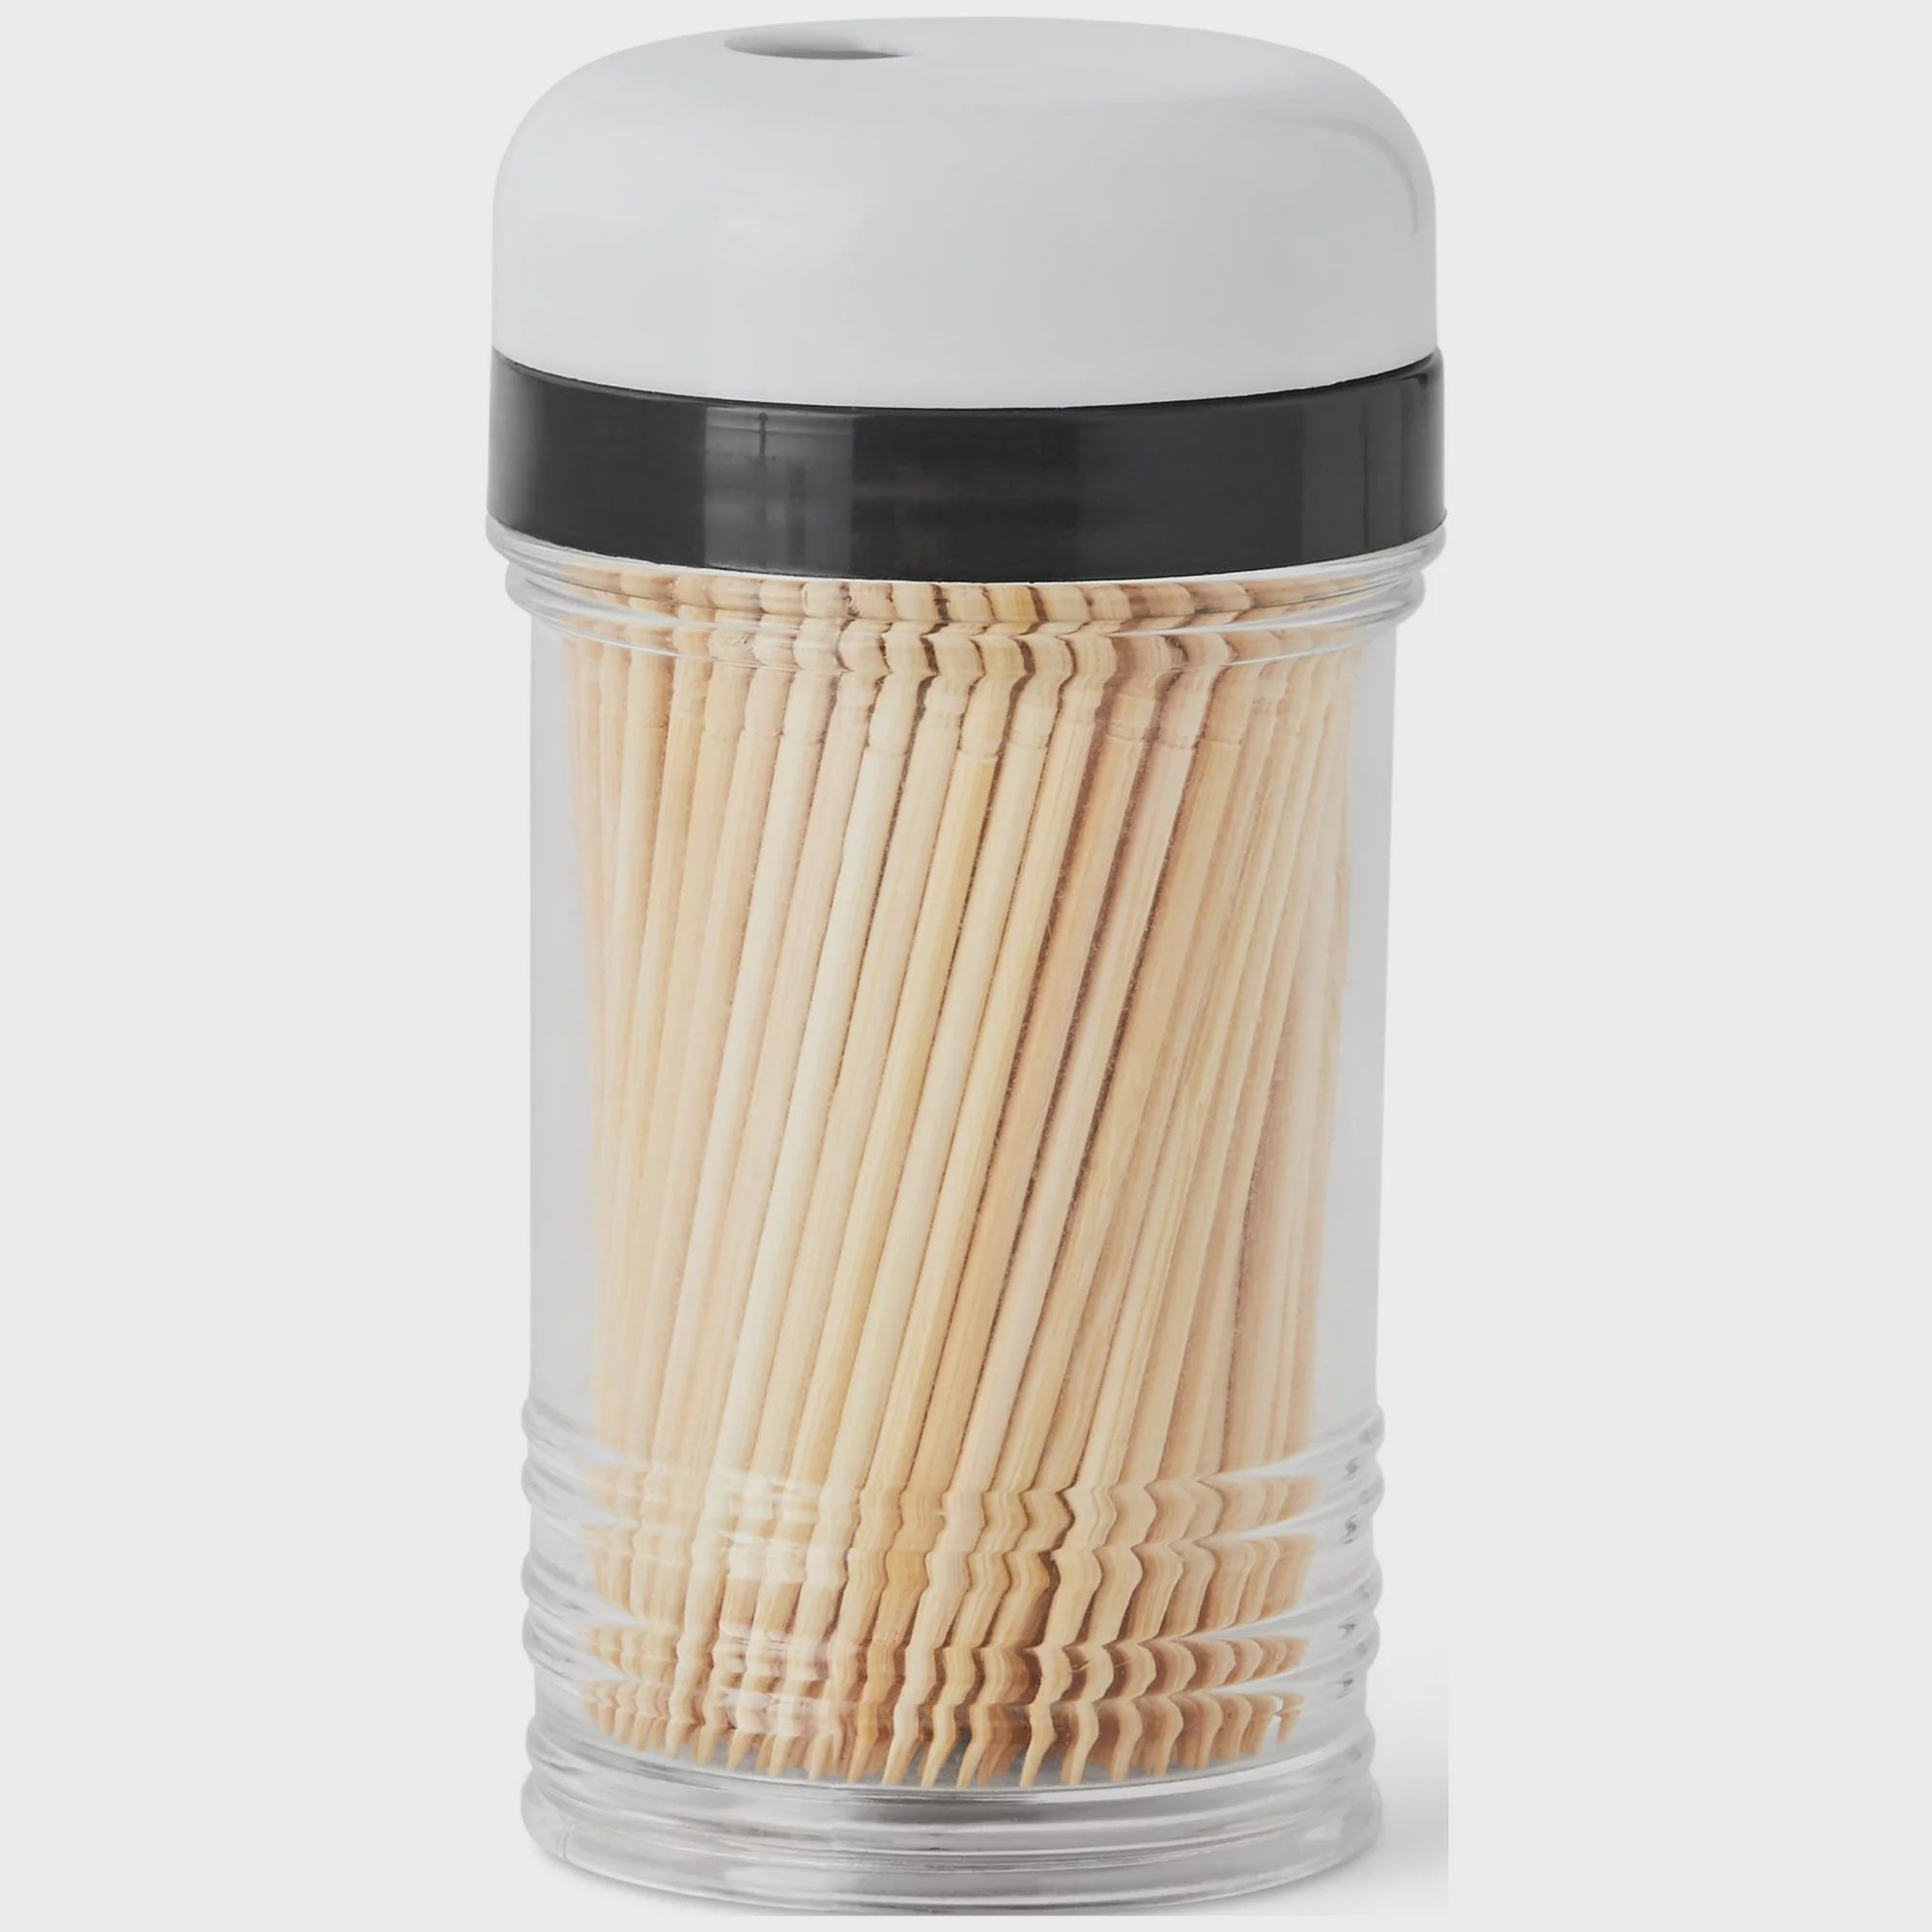 Wooden Toothpicks Bundle w/ Clear Plastic Container, 200pcs